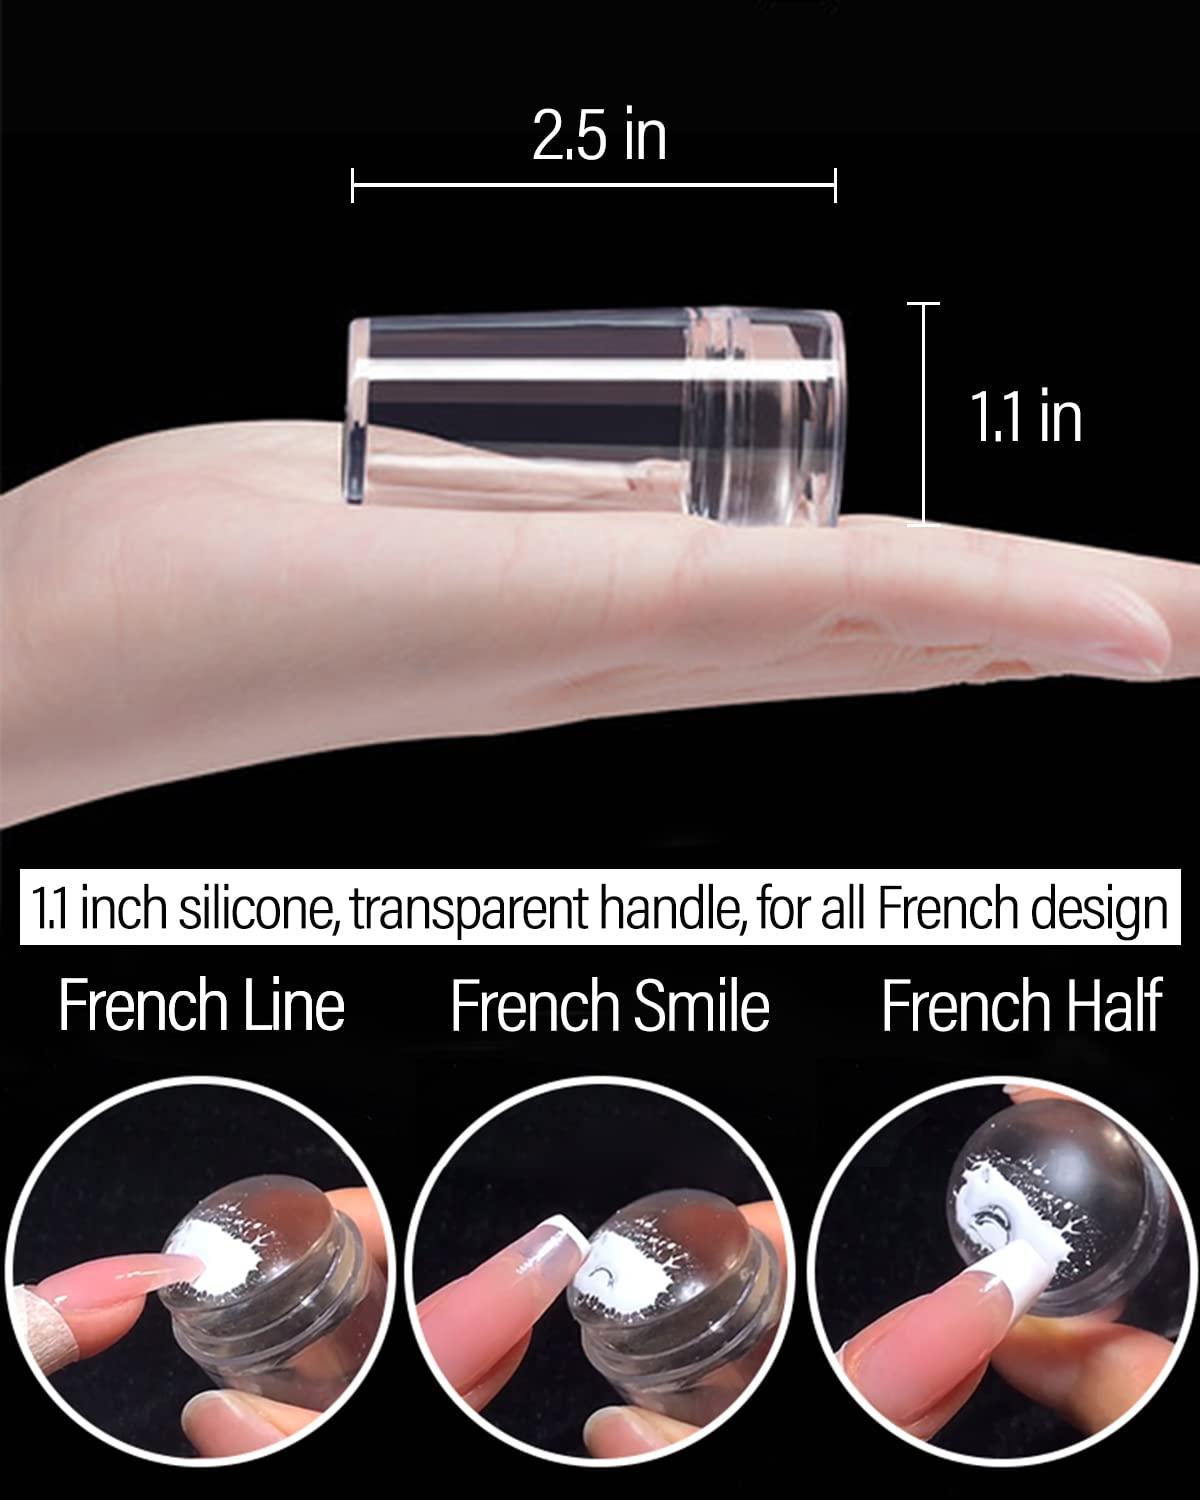 Transparent Silicone Nail Art Stamping Kit Clear Silicone Nail Stamper,  With Scraper For Diy Nail Art Tools, Don't Miss These Great Deals